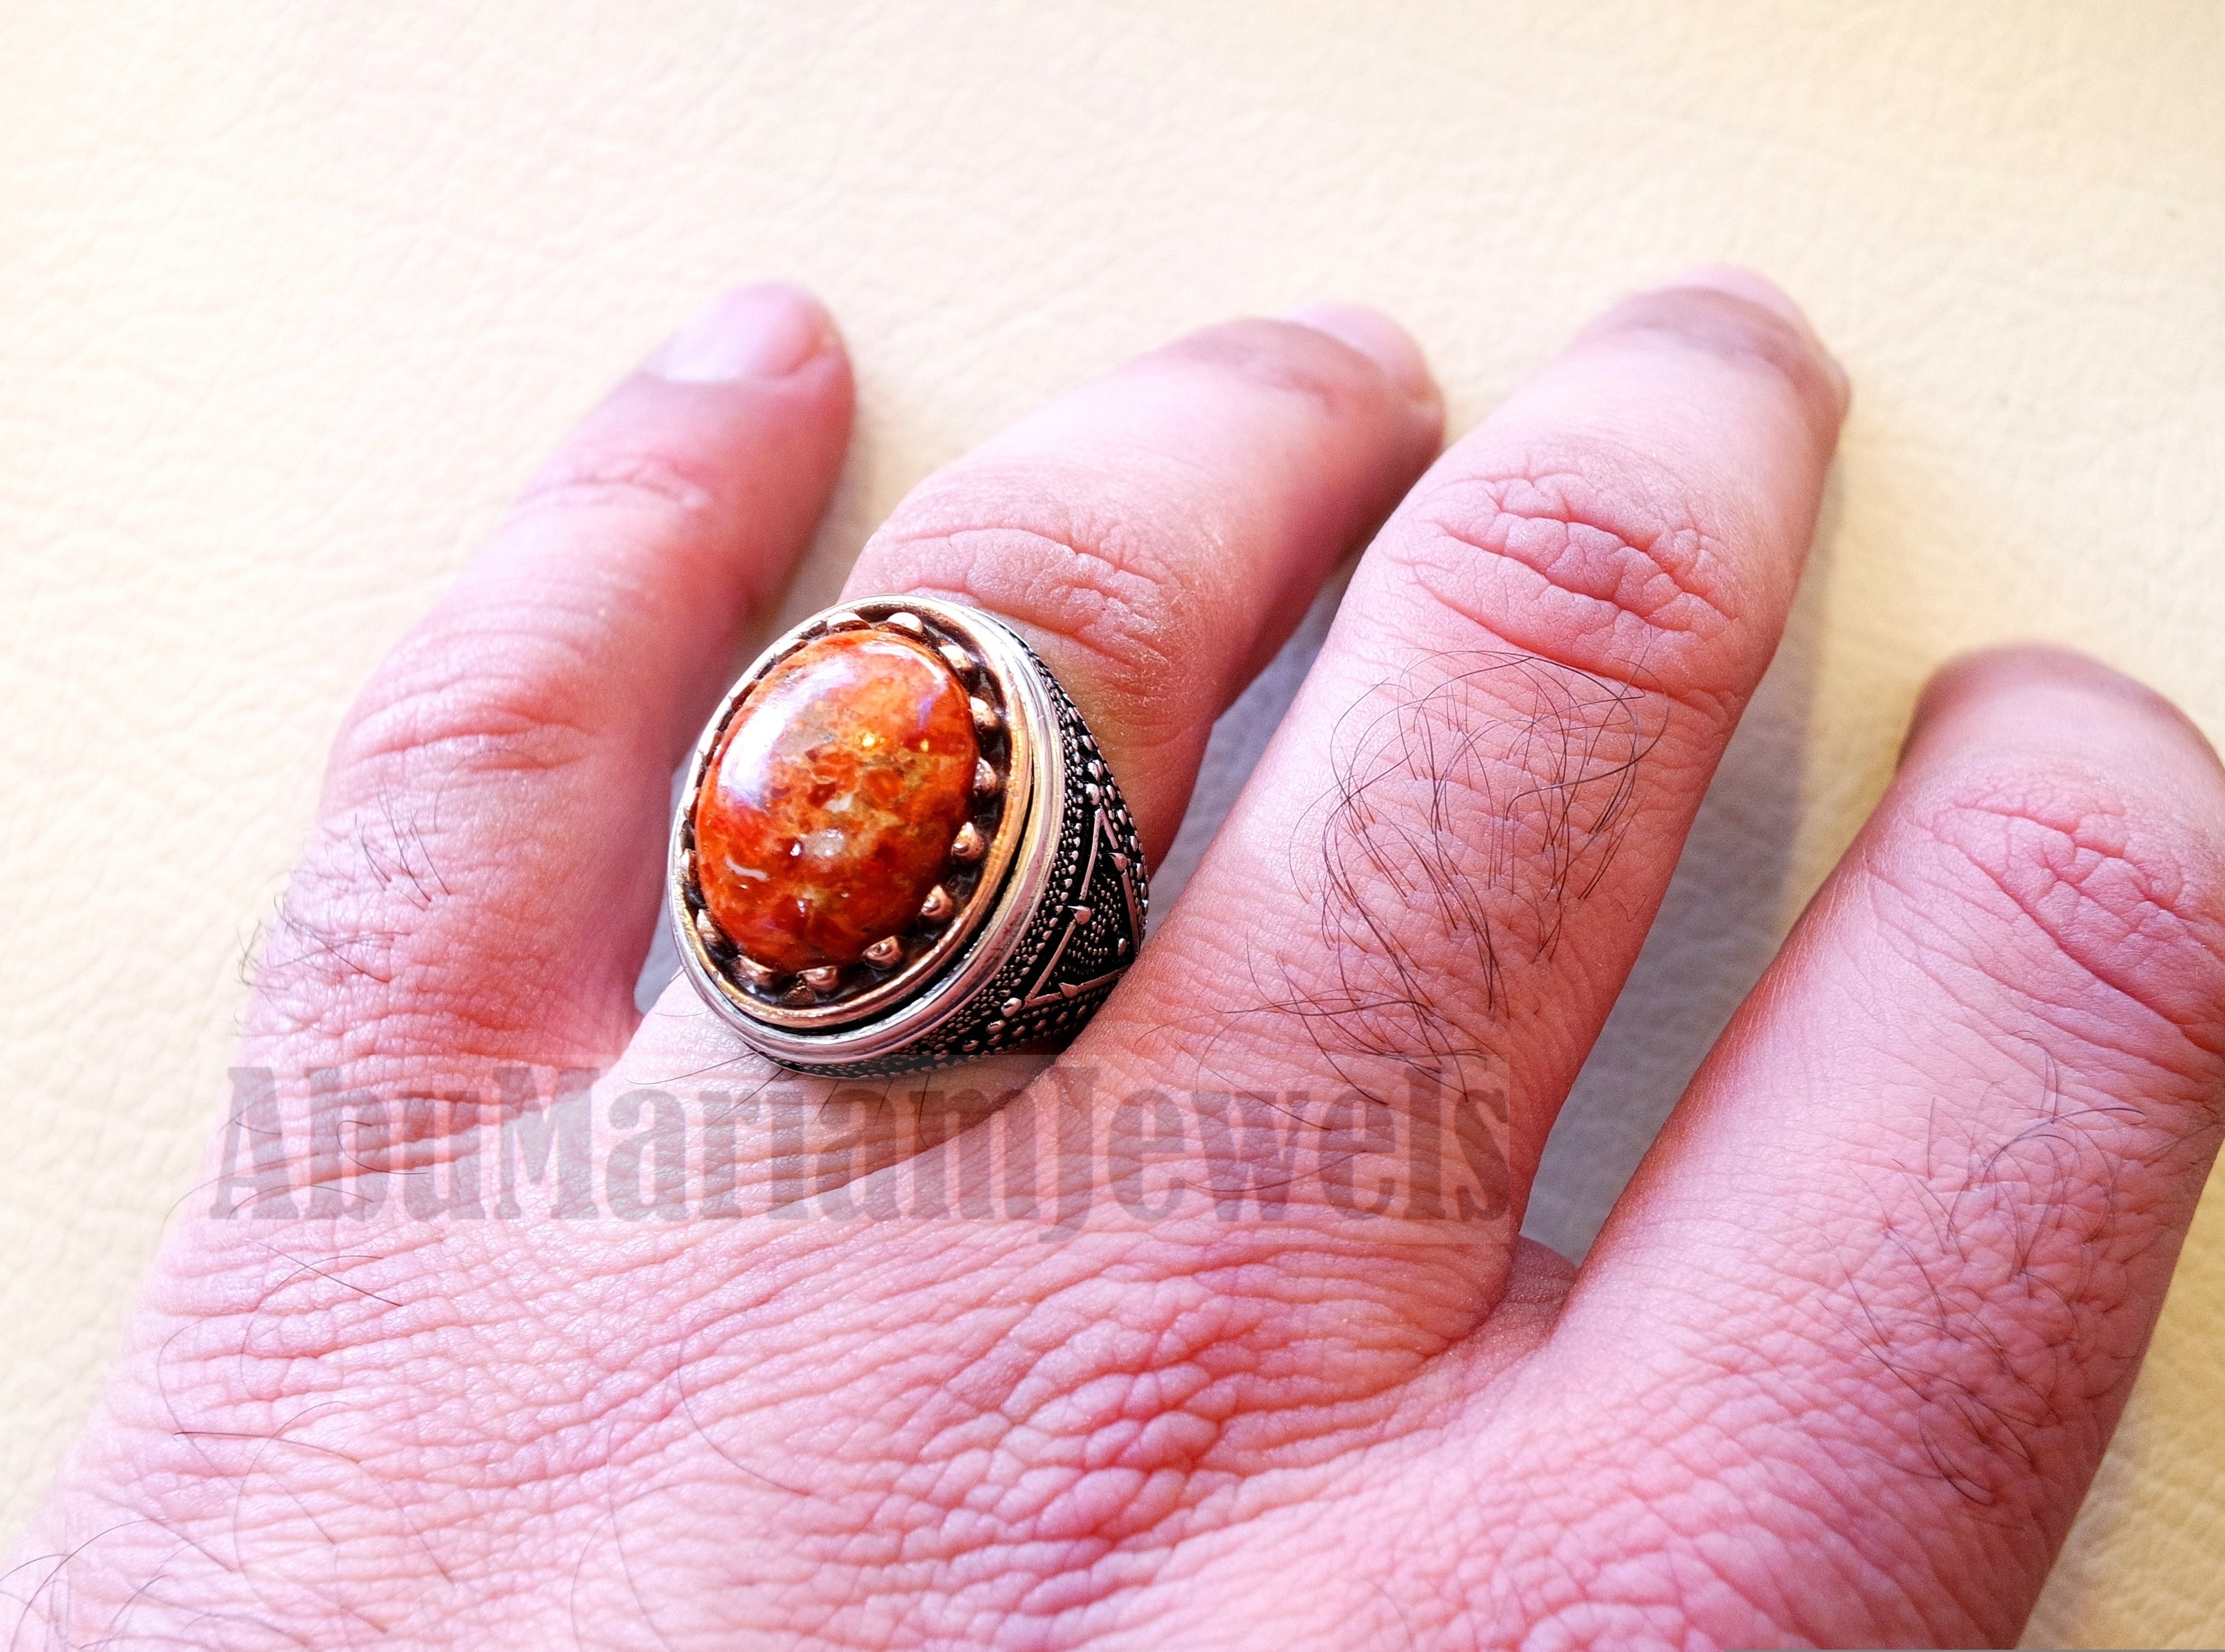 Sponge coral Murjan heavy men ring orange to red natural stone sterling silver and bronze 925 ottoman style all sizes fast shipping مرجان